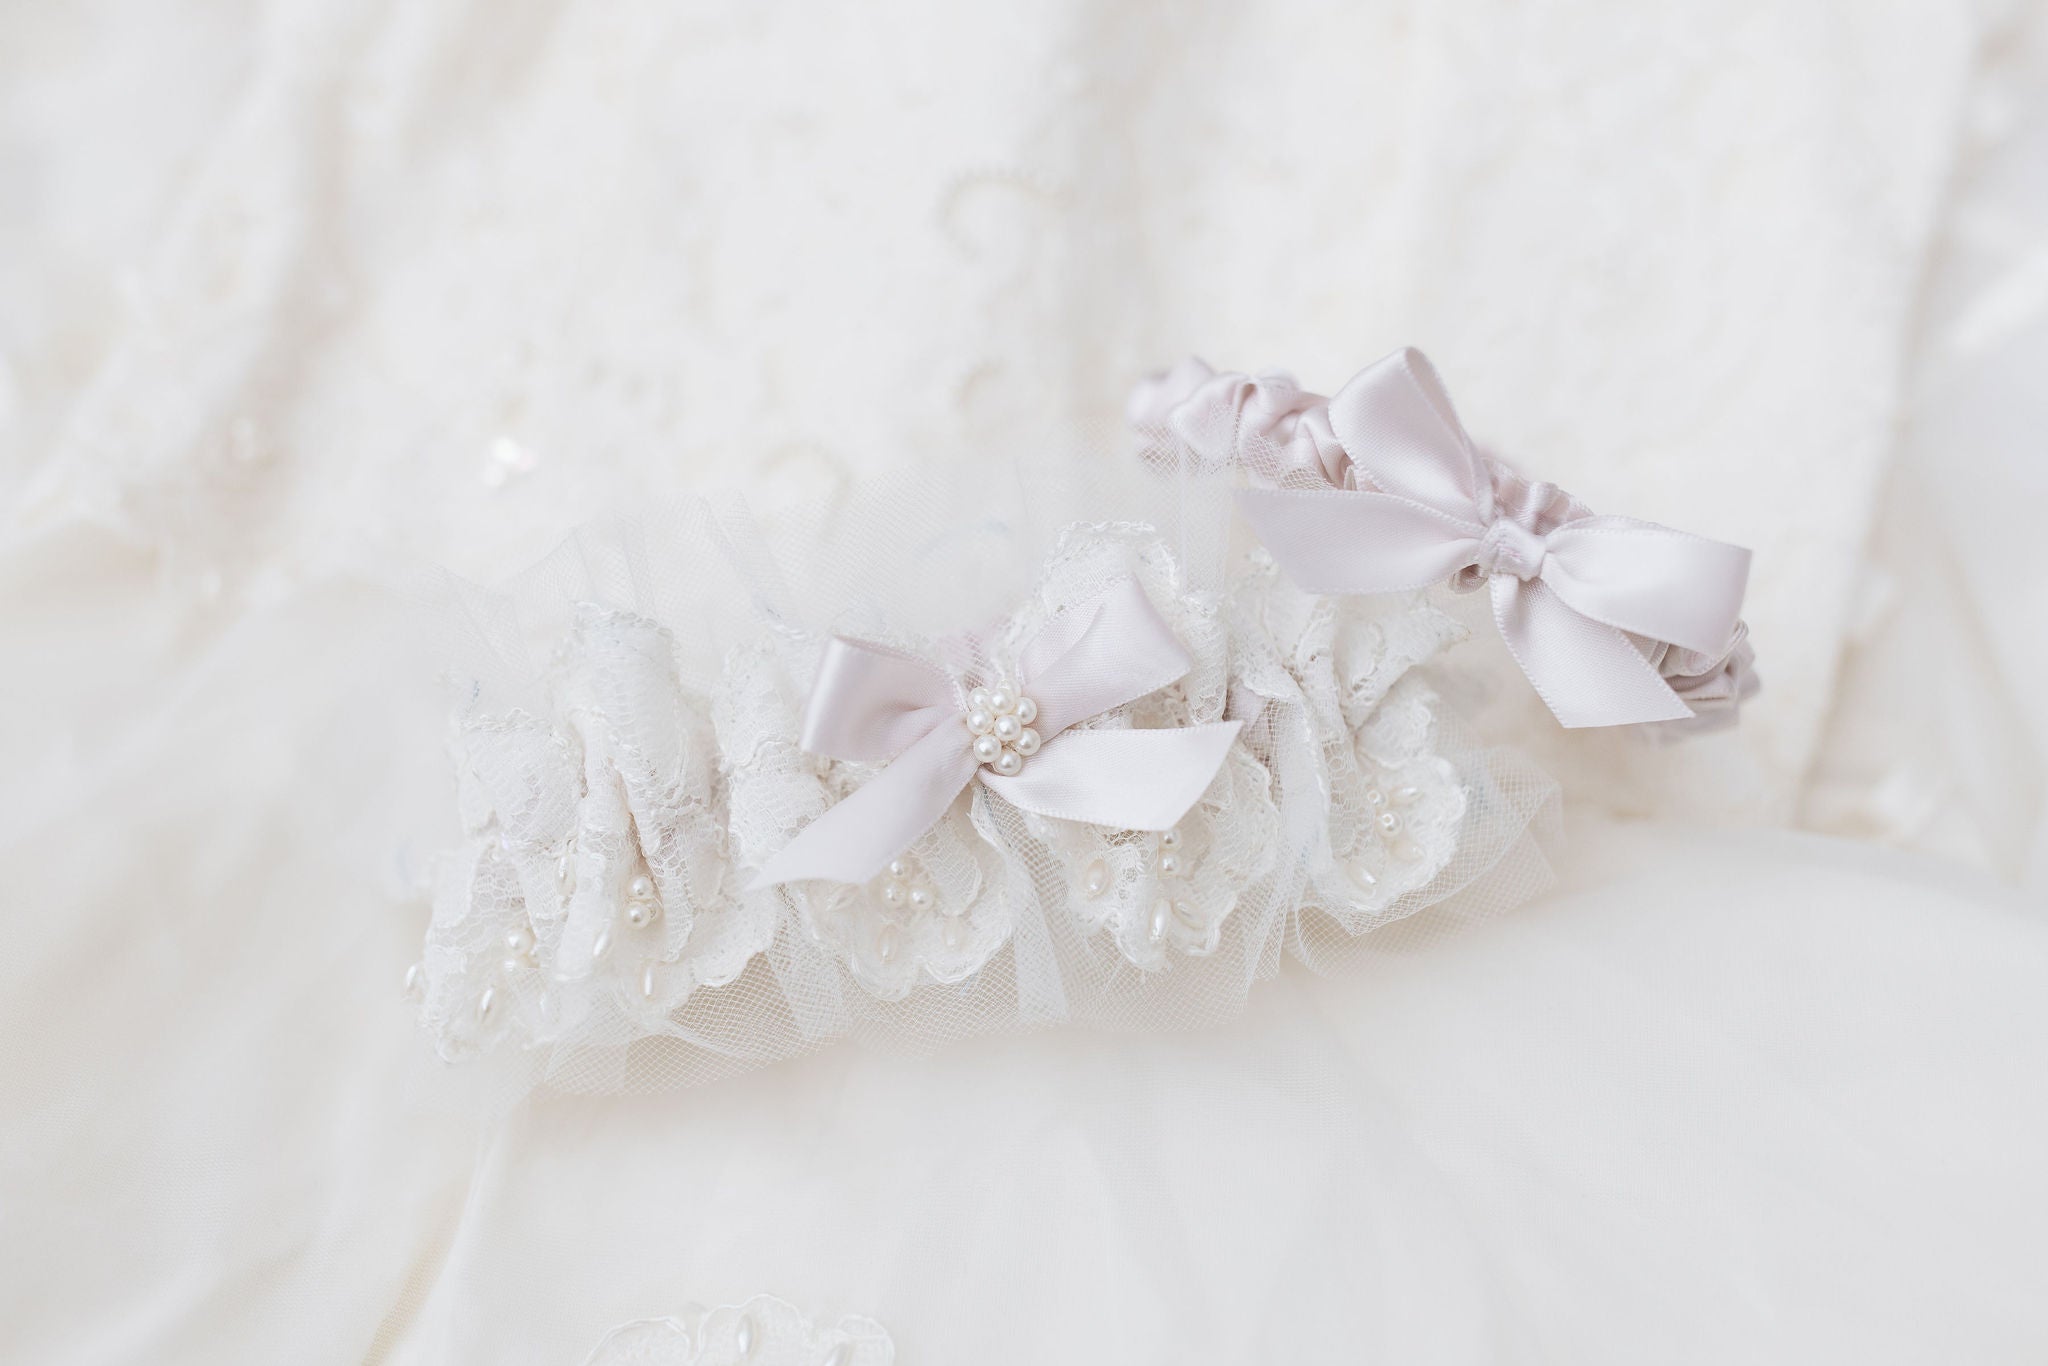 wedding garter set made from mothers wedding dress with pearls, lace, blush accents and personalized embroidery - a handmade wedding heirloom by The Garter Girl